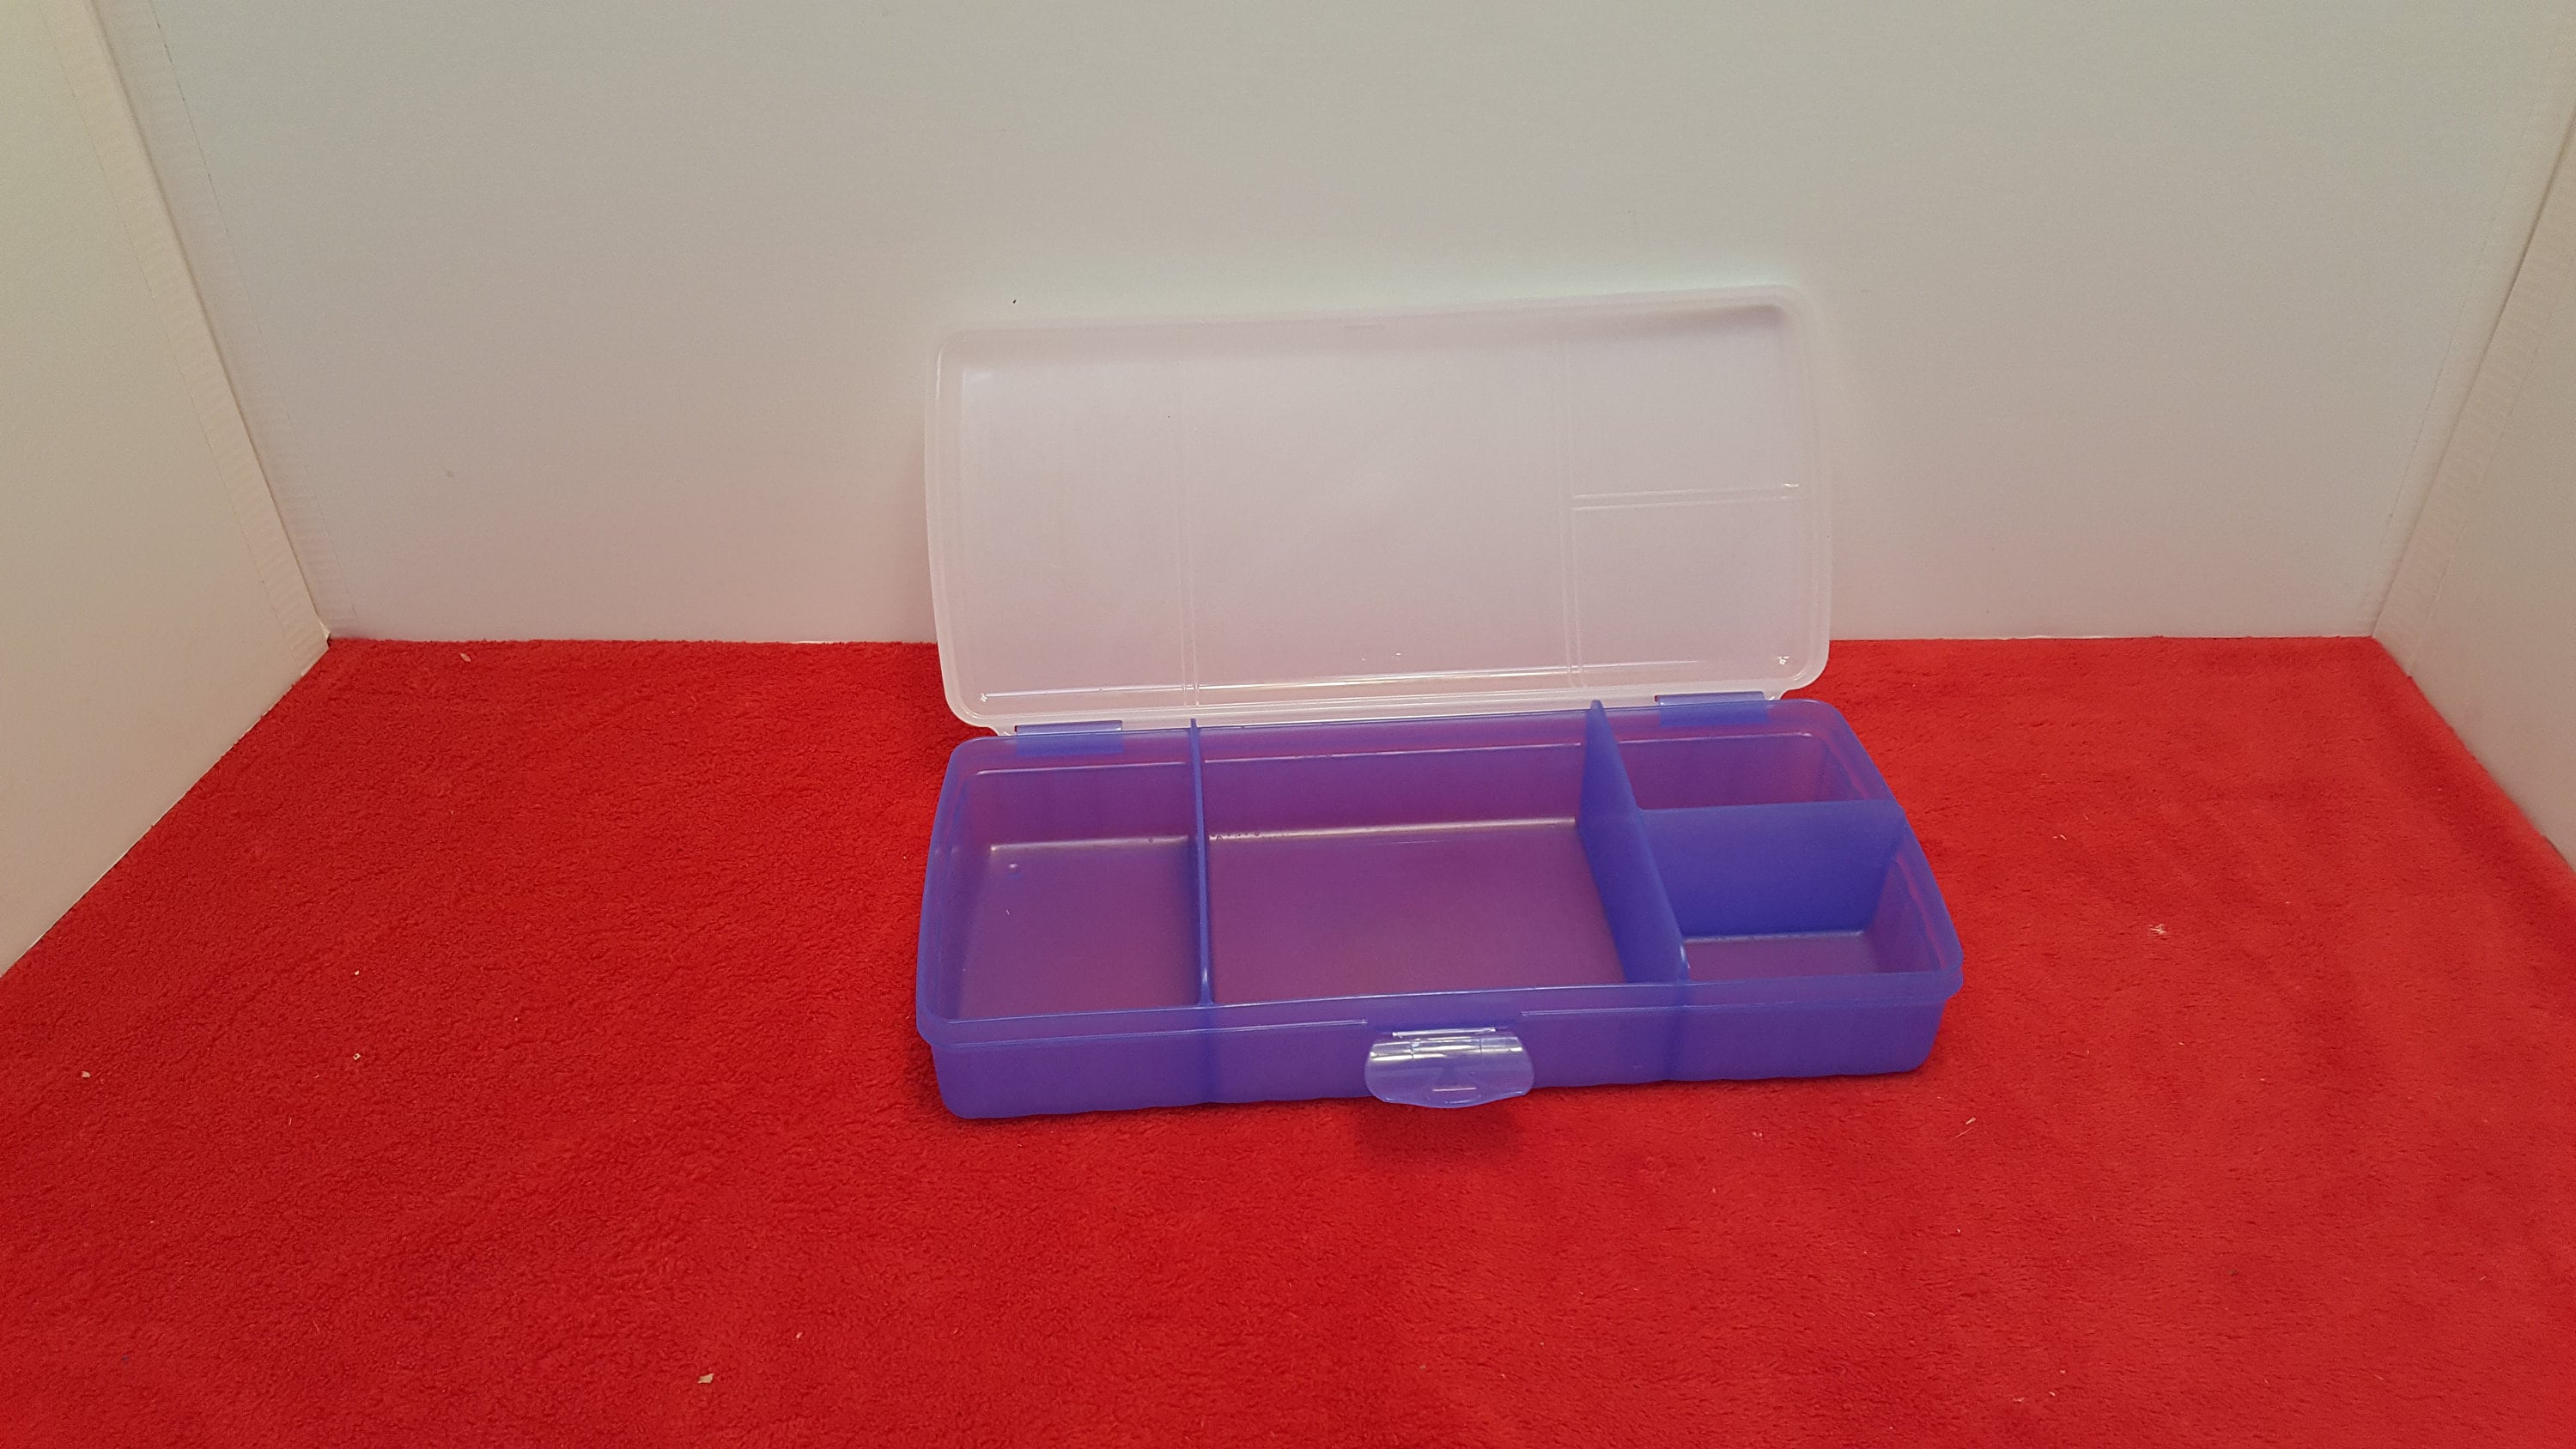 Tupperware Large Lunch-It Divided Lunch Bento Box Watermelon Rectangle  Keeper ❤️